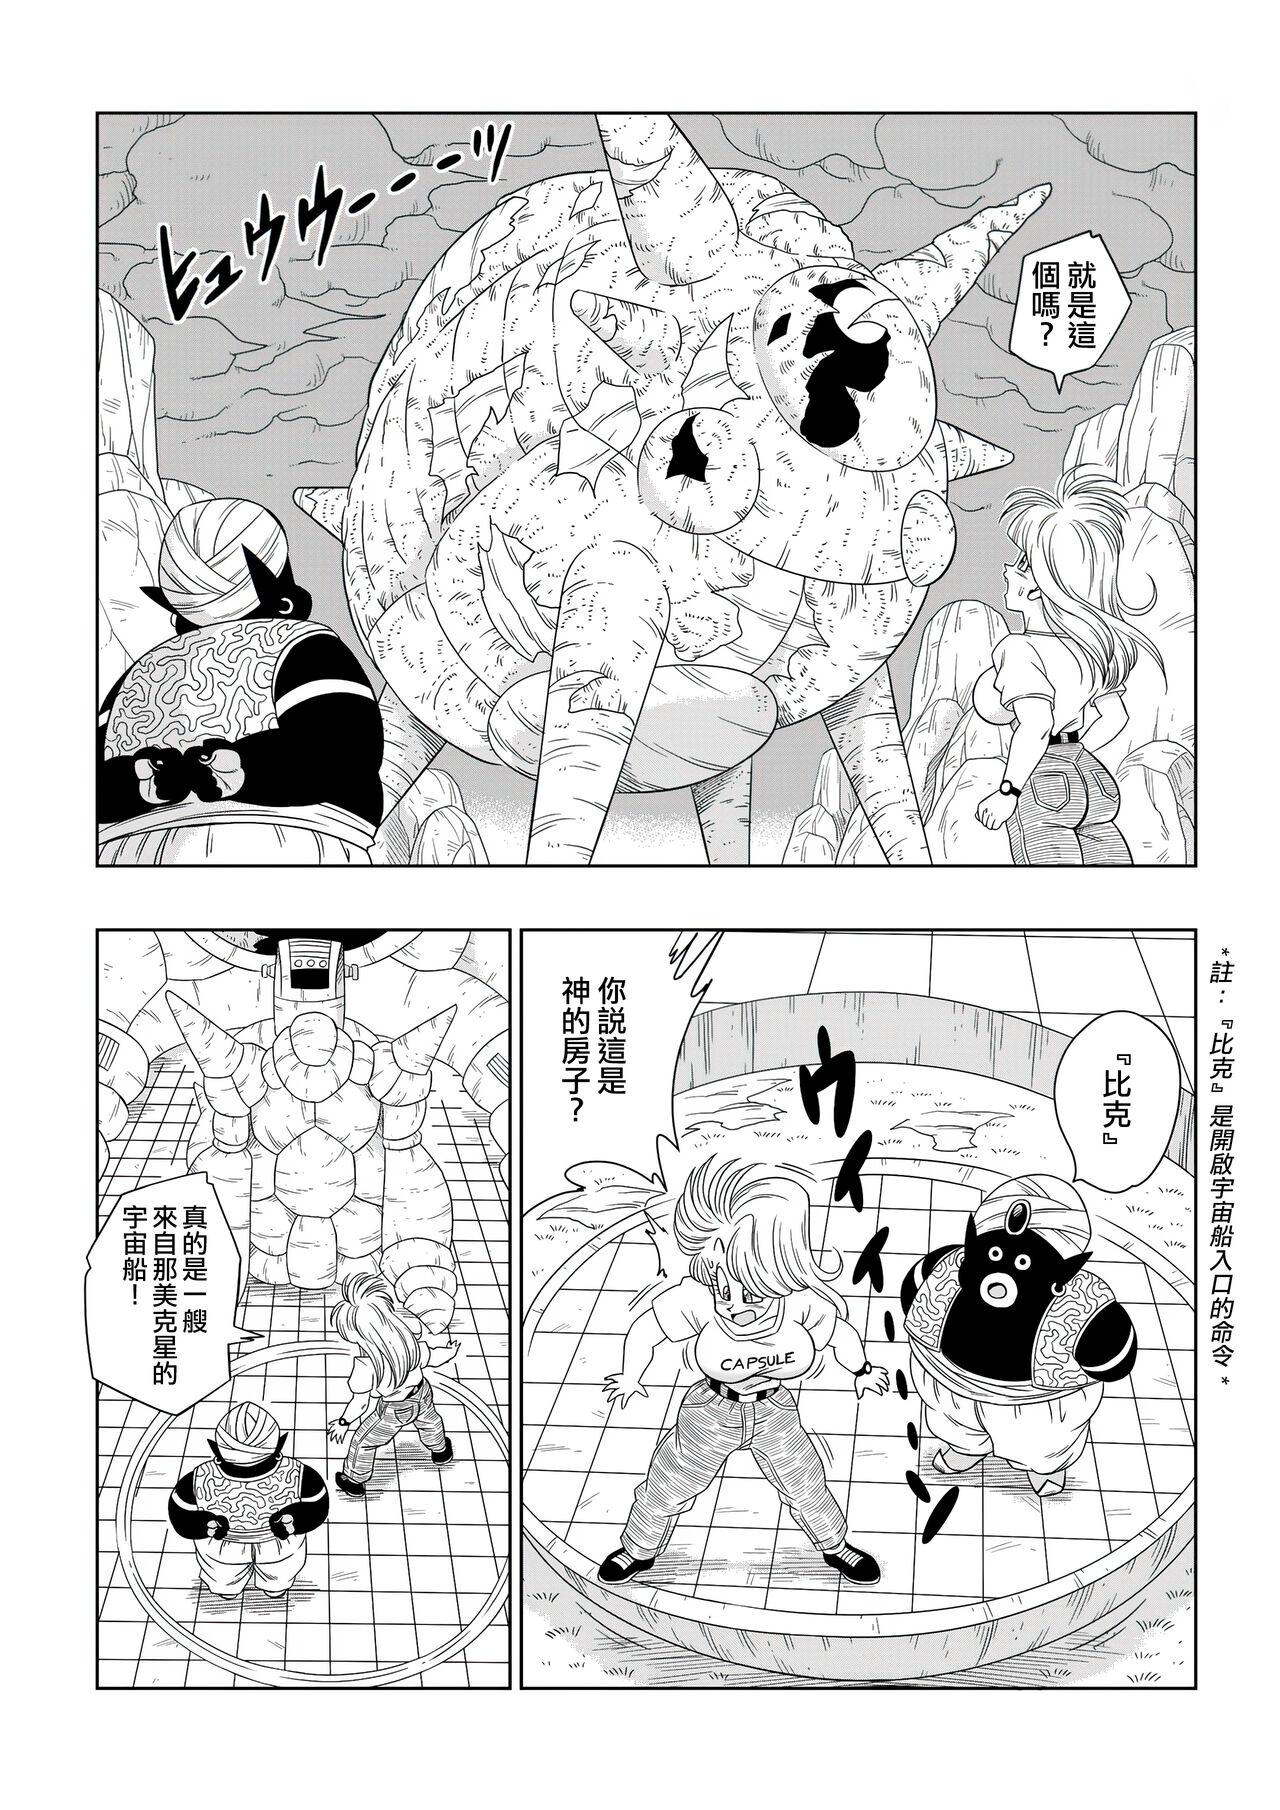 Cameltoe Bulma Meets Mr.Popo - Sex inside the Mysterious Spaceship! - Dragon ball z Daring - Page 5